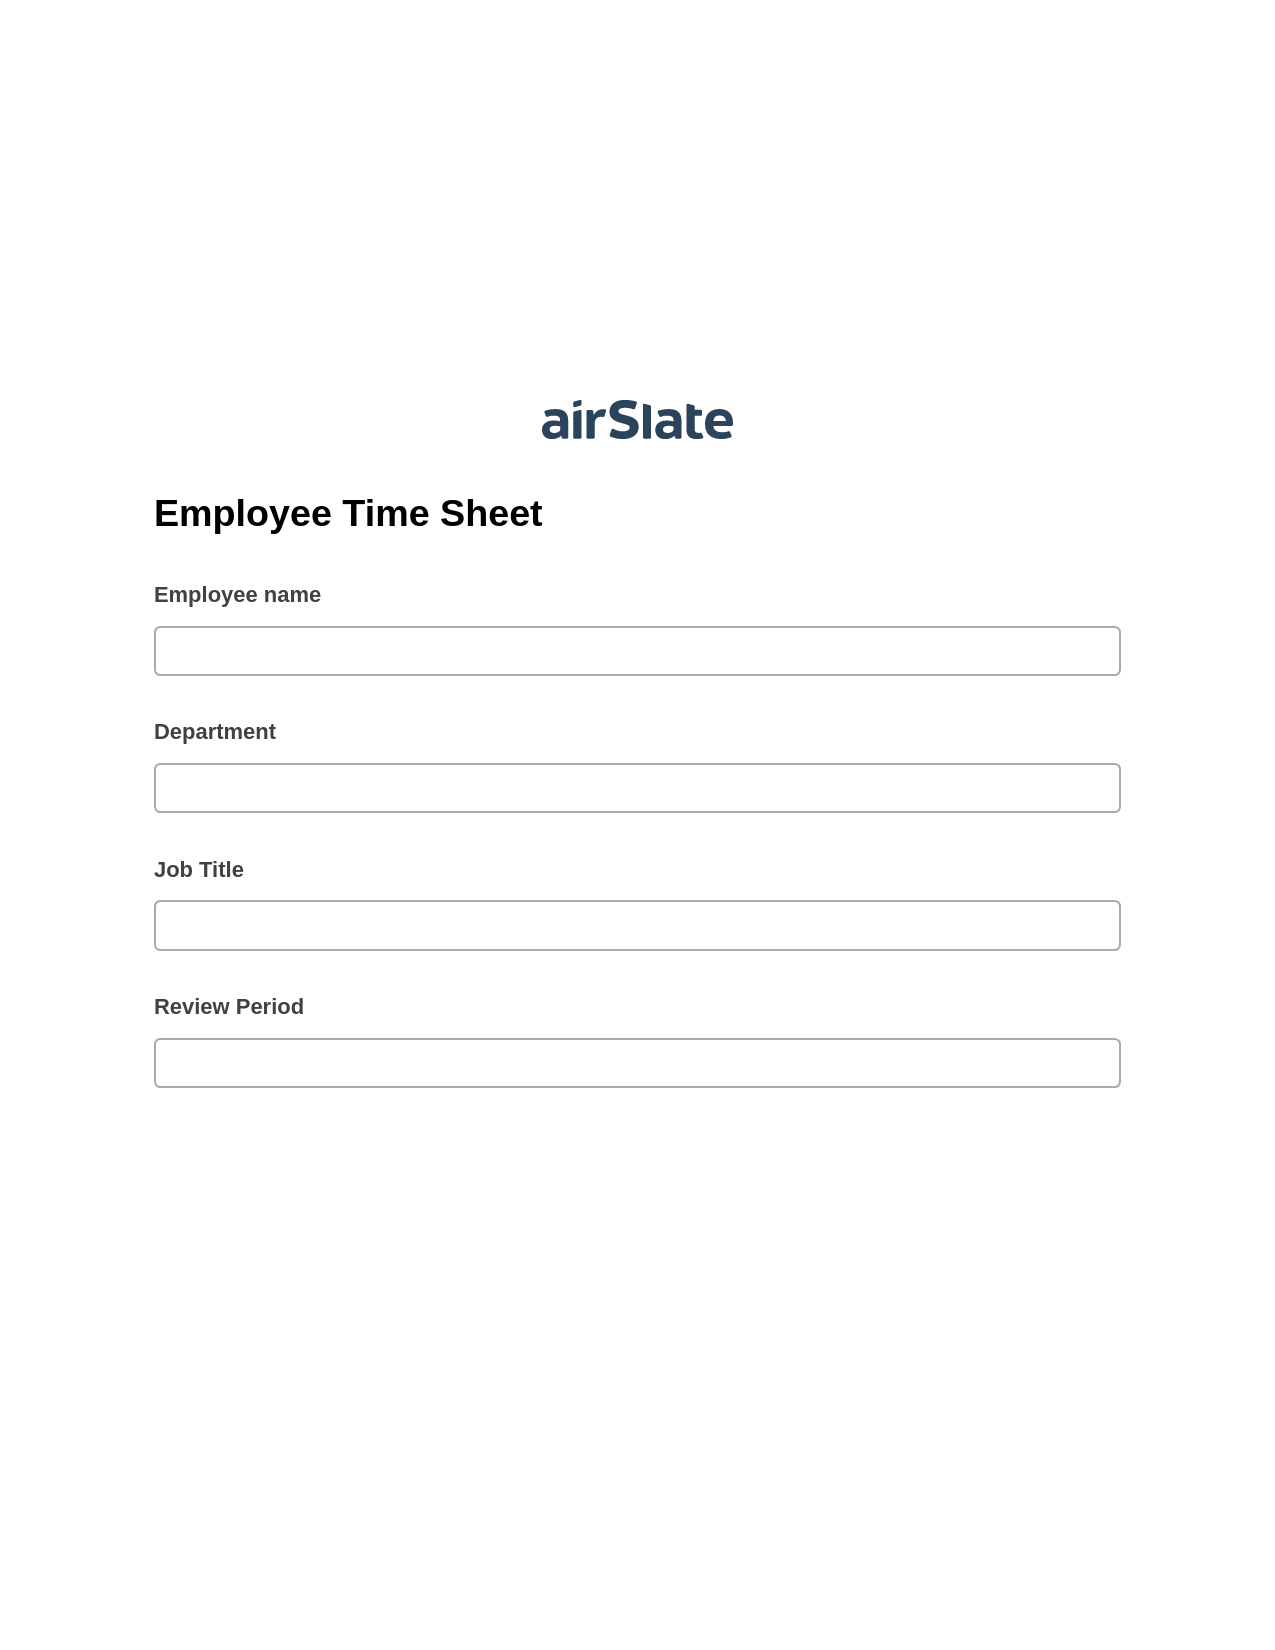 Multirole Employee Time Sheet Pre-fill from AirTable Bot, Update NetSuite Record Bot, Text Message Notification Postfinish Bot